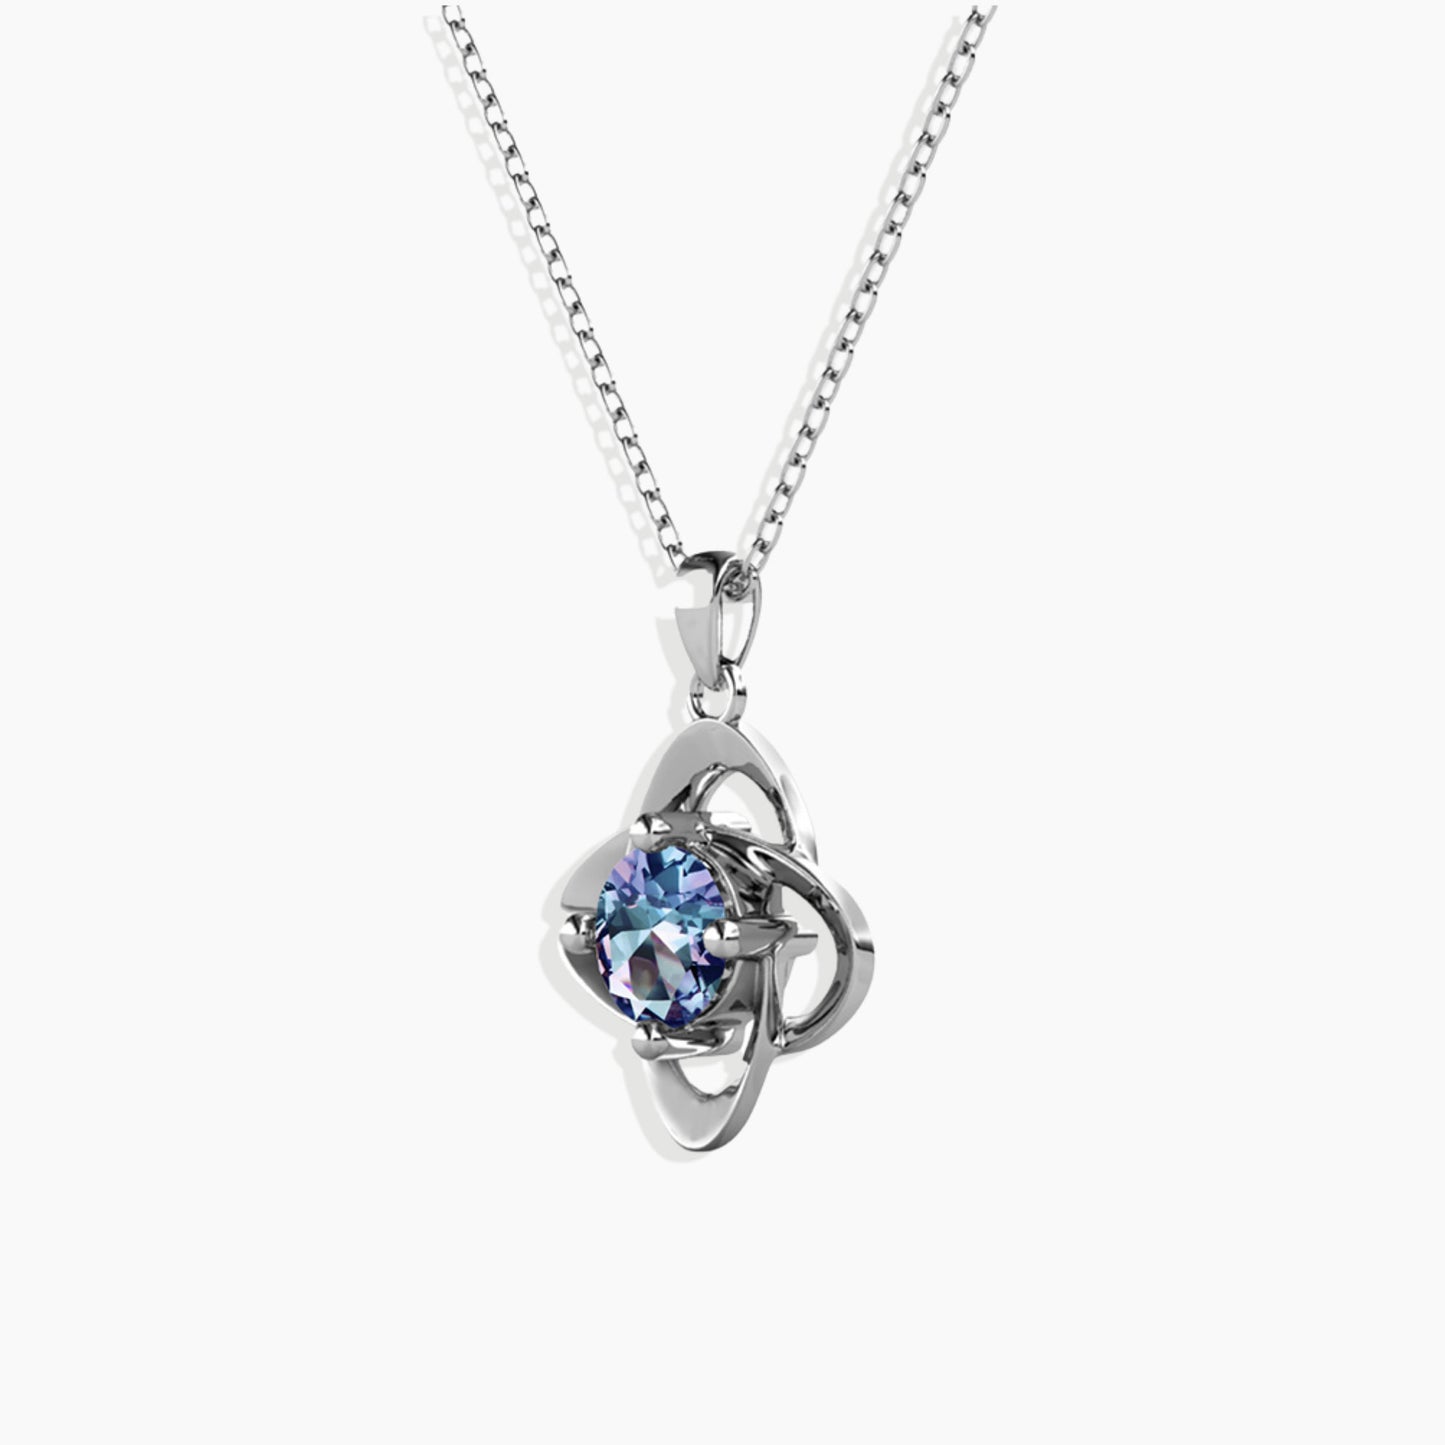 Alexandrite Galaxy Pendant Necklace in Sterling Silver